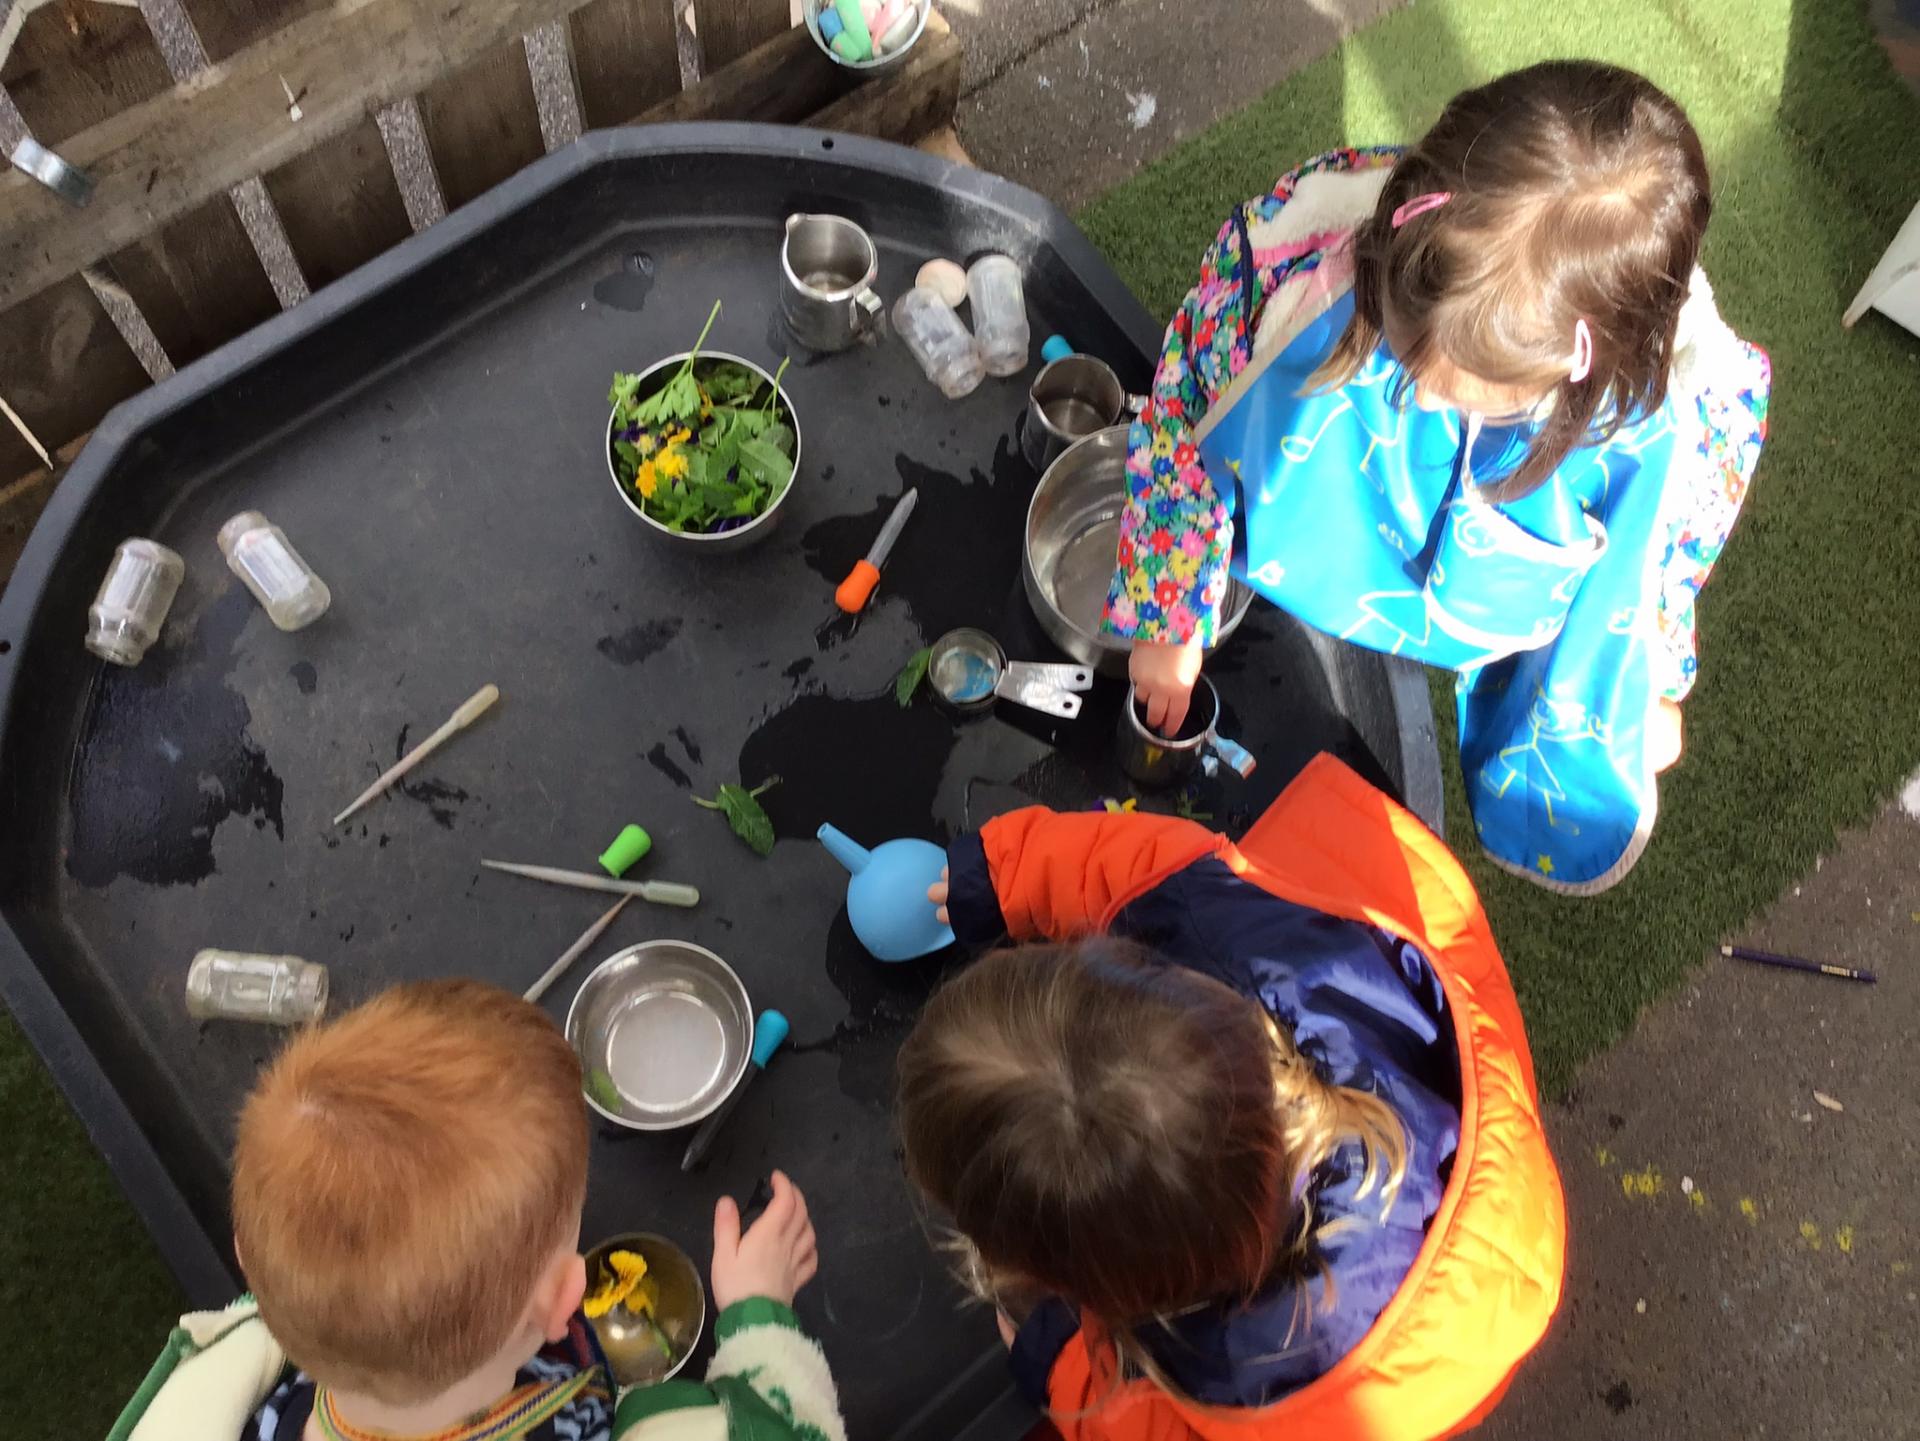 Children are welcome to join our Preschool A non-profit making organisation & registered charity